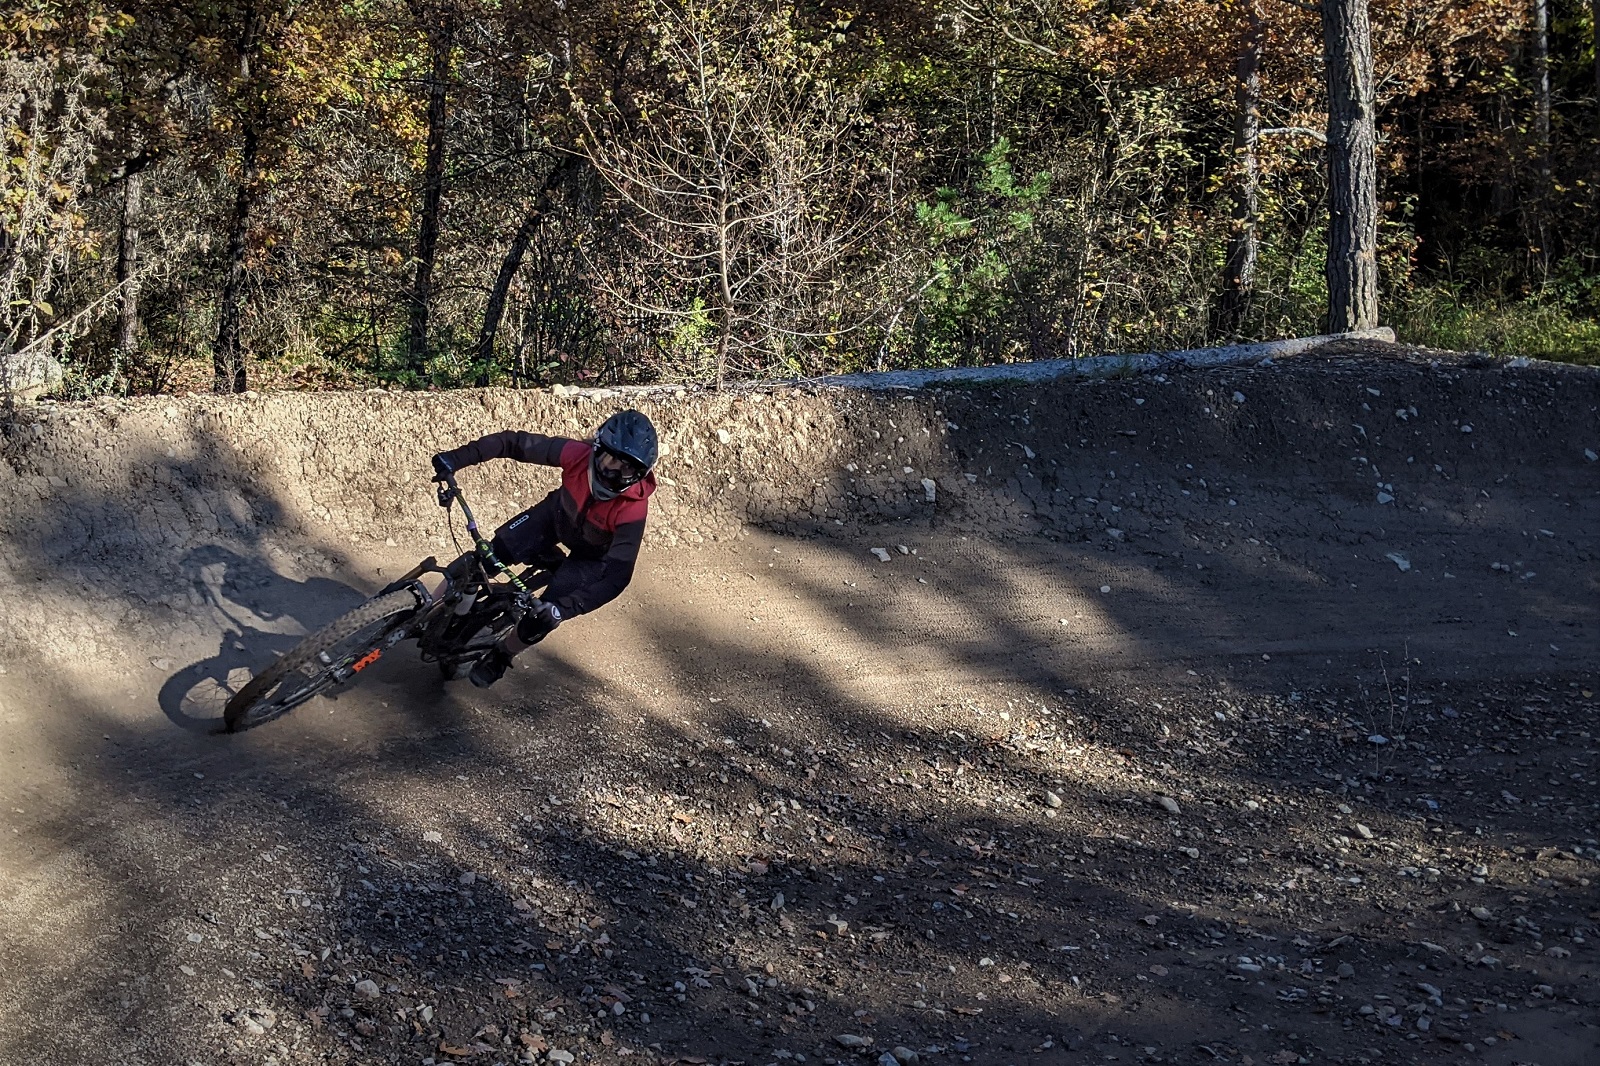 Whip it. Not just about jumps. There's berm things too.